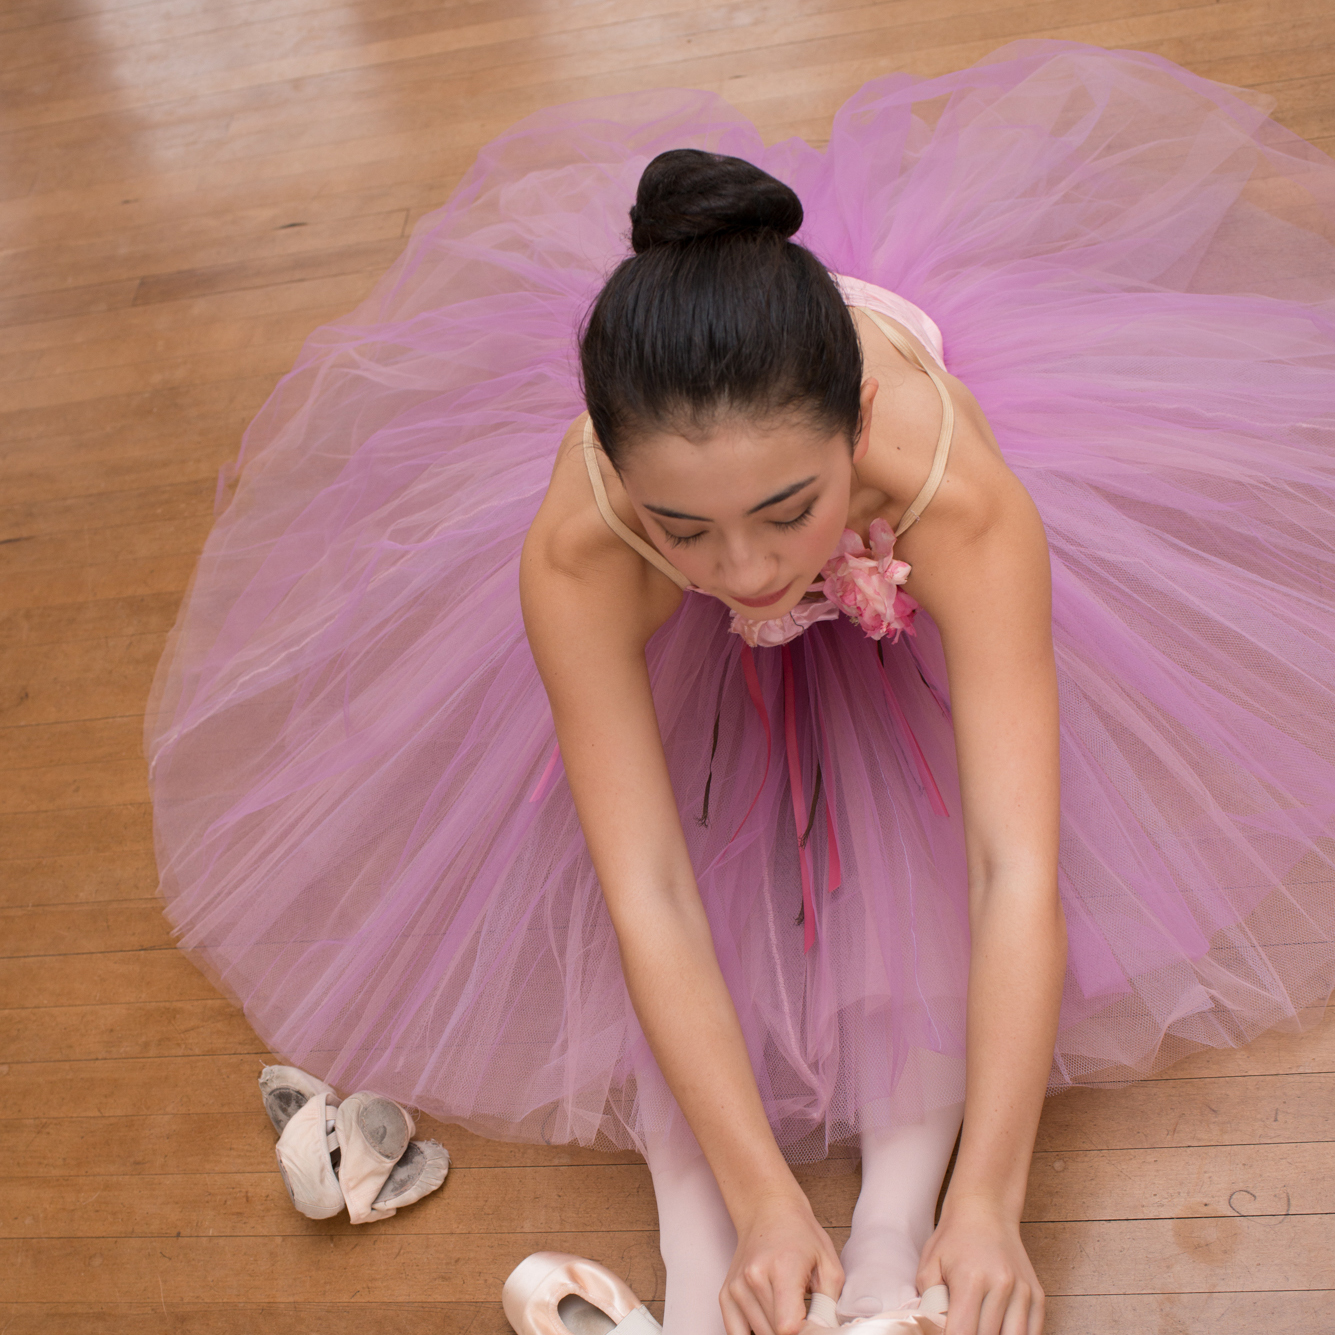 A teenage dancer in her tutu sits on the floor while putting on her pointe shoes.